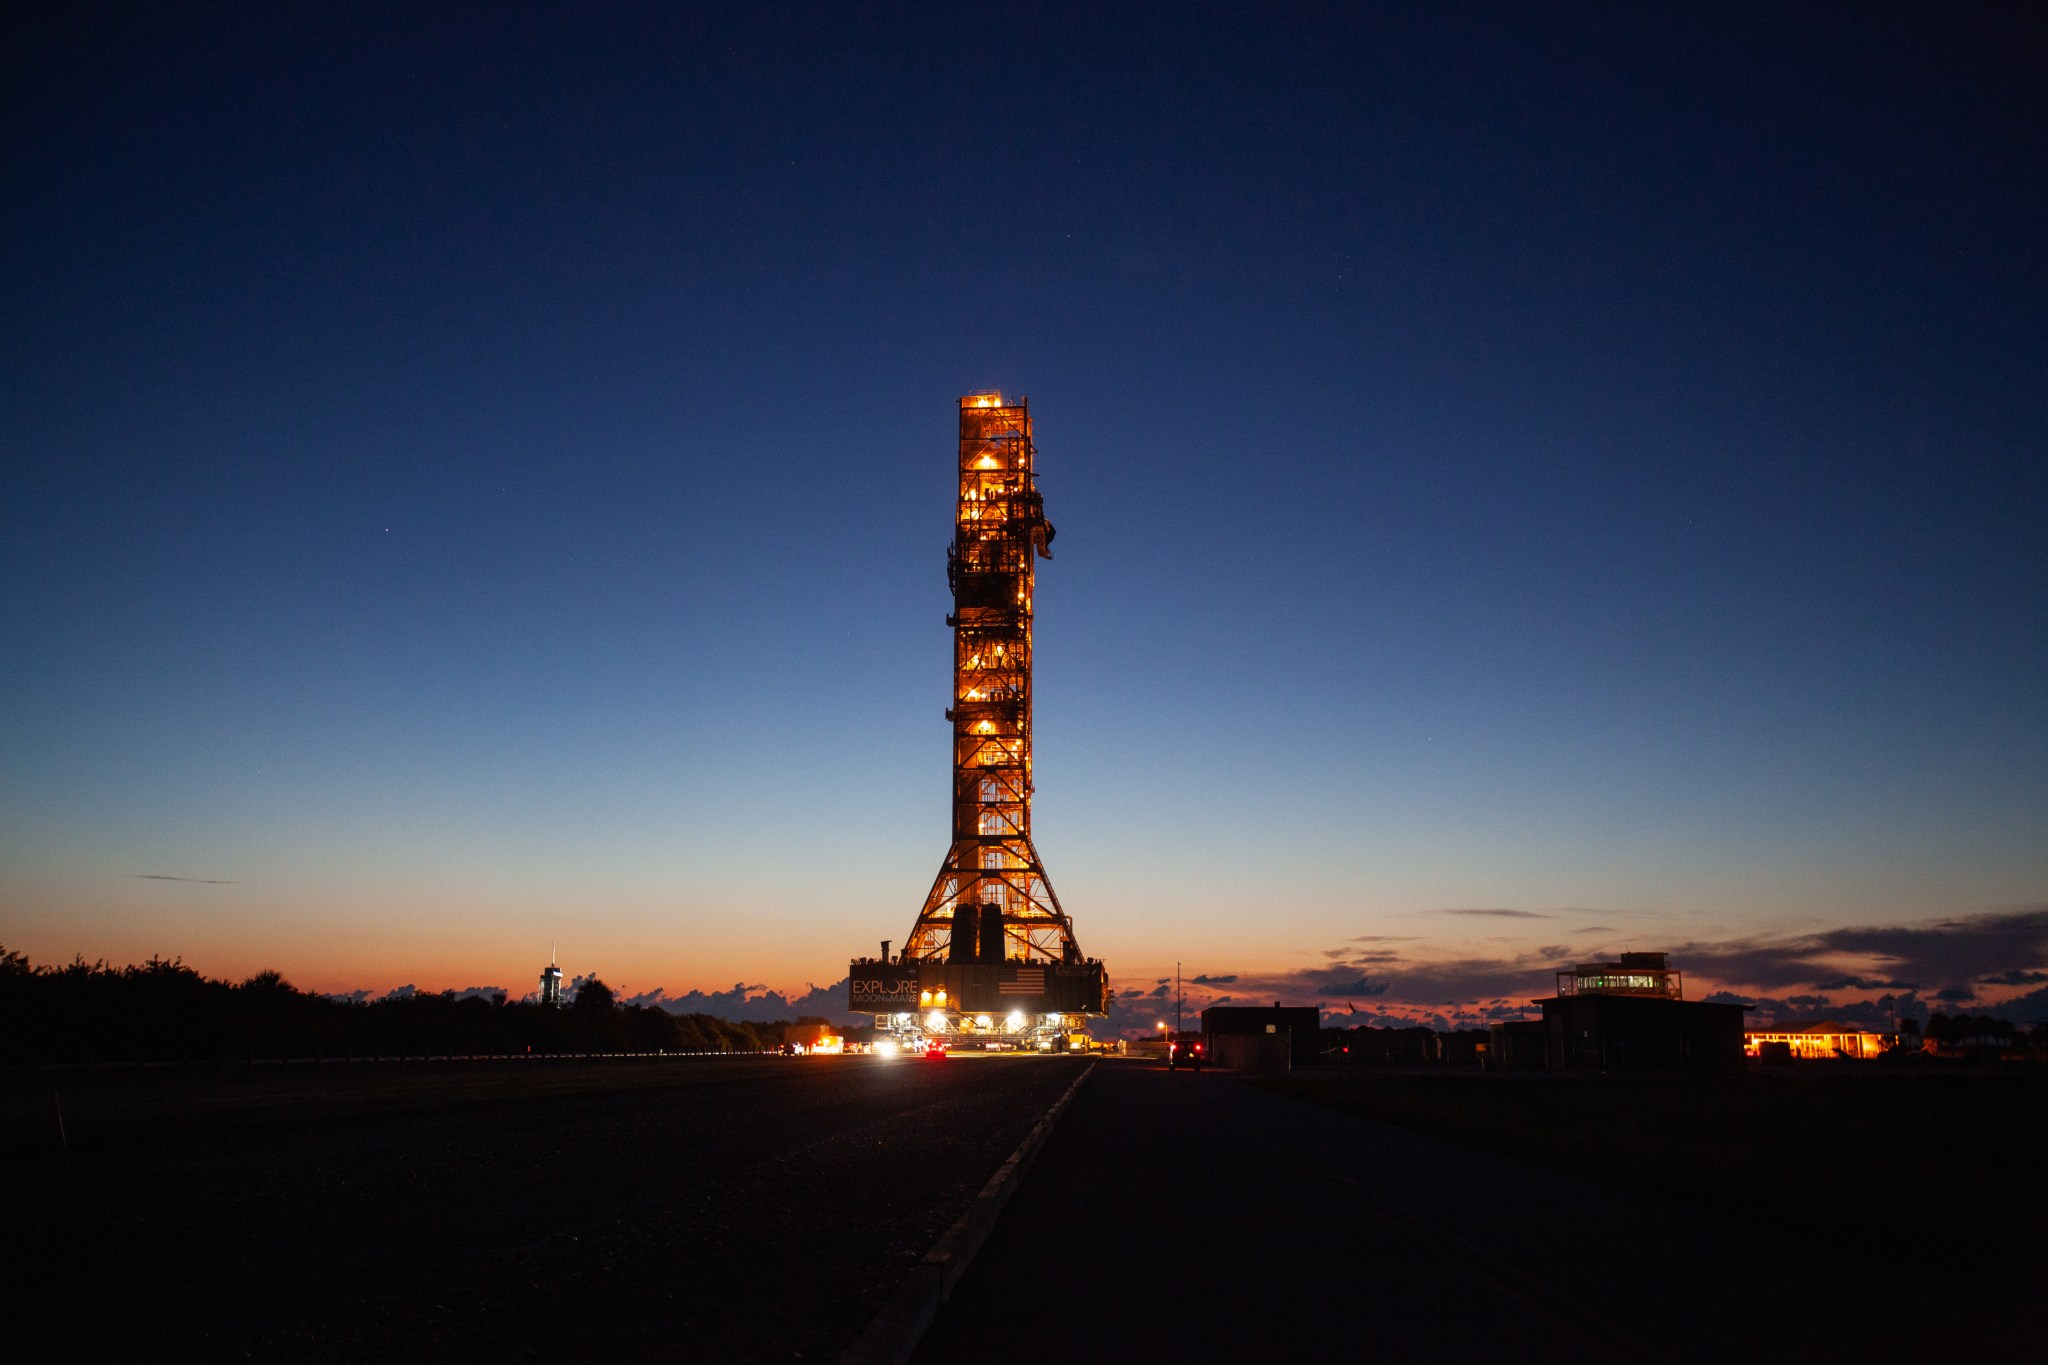 NASA’s mobile launcher makes its last solo trek to Kennedy Space Center’s Launch Complex 39B in Florida on June 27, 2019